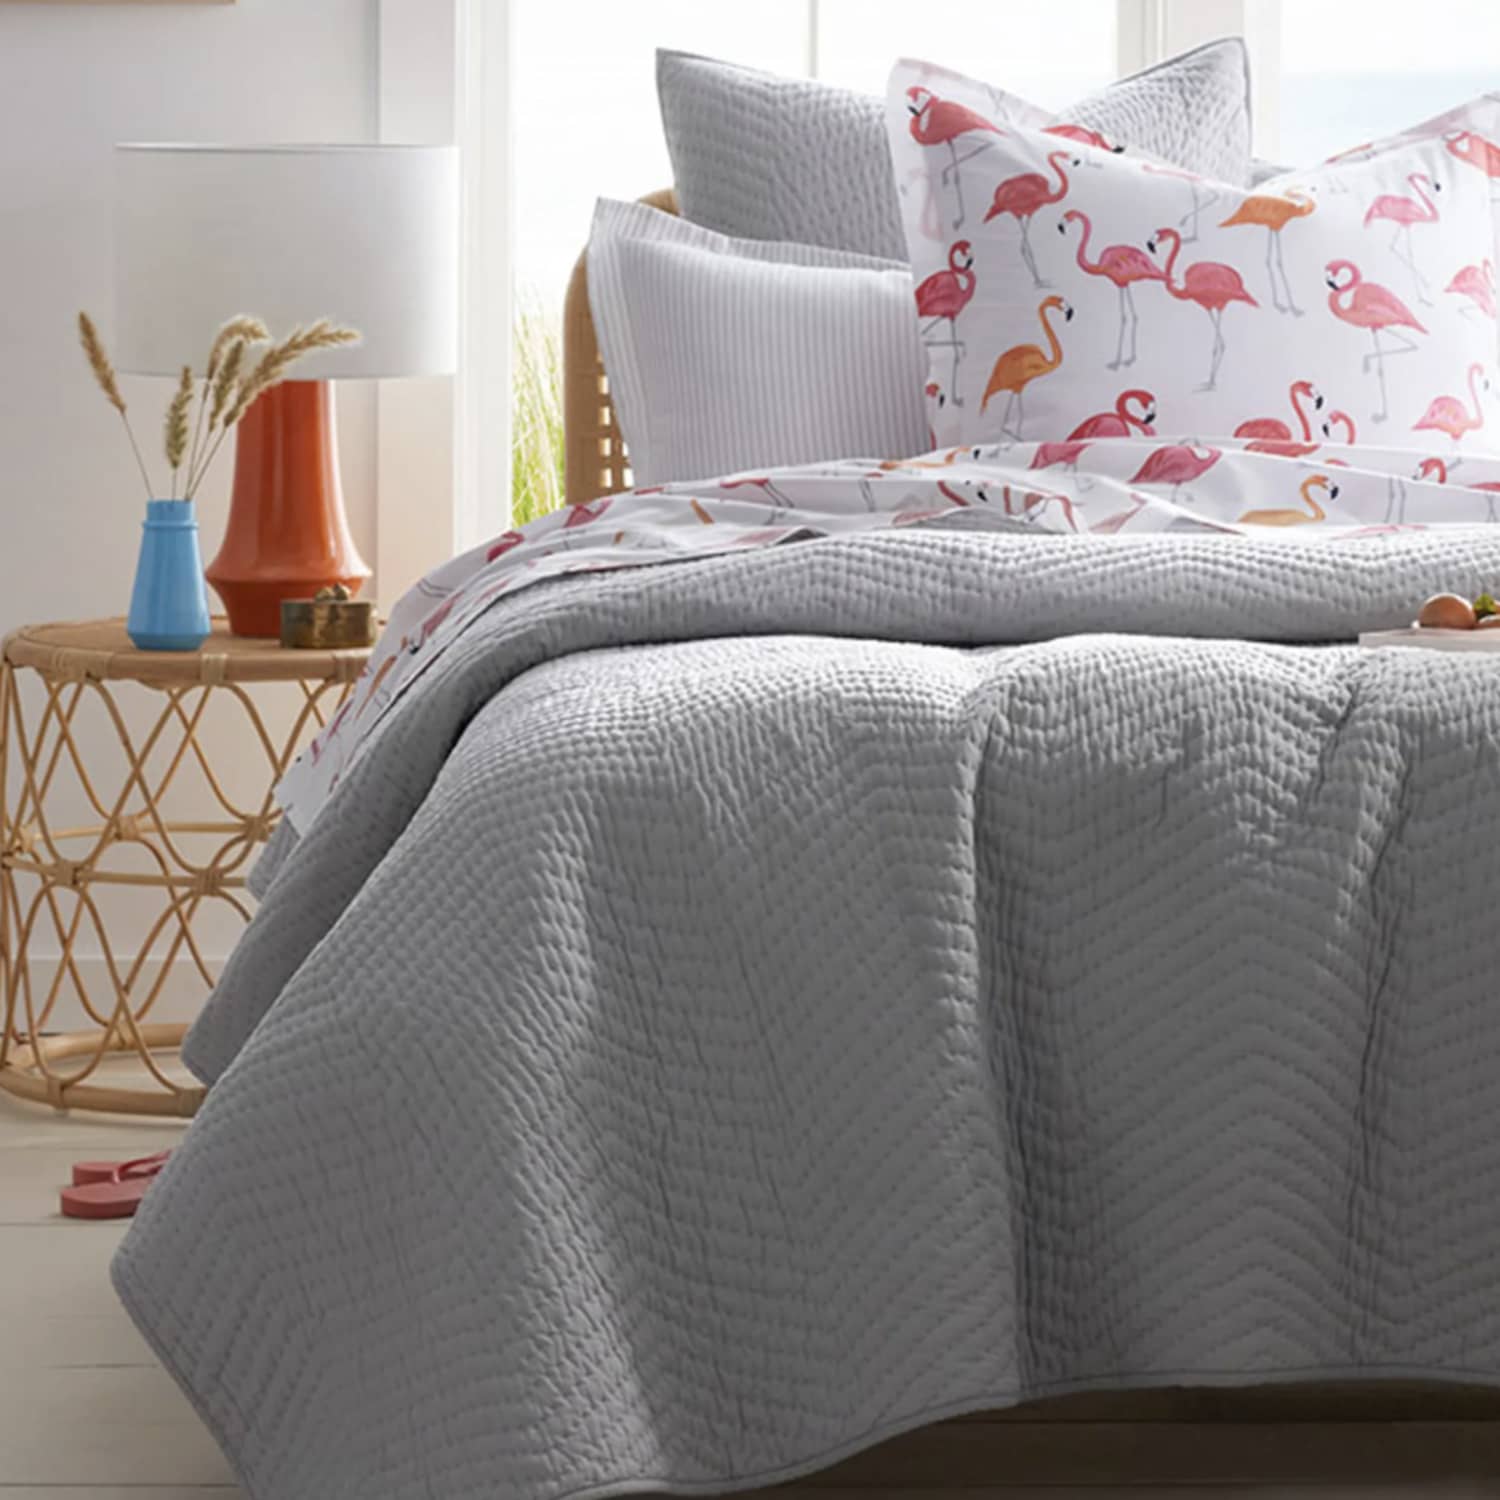 Best Summer Bedding: The Company Cotton Voile Quilt | Apartment Therapy